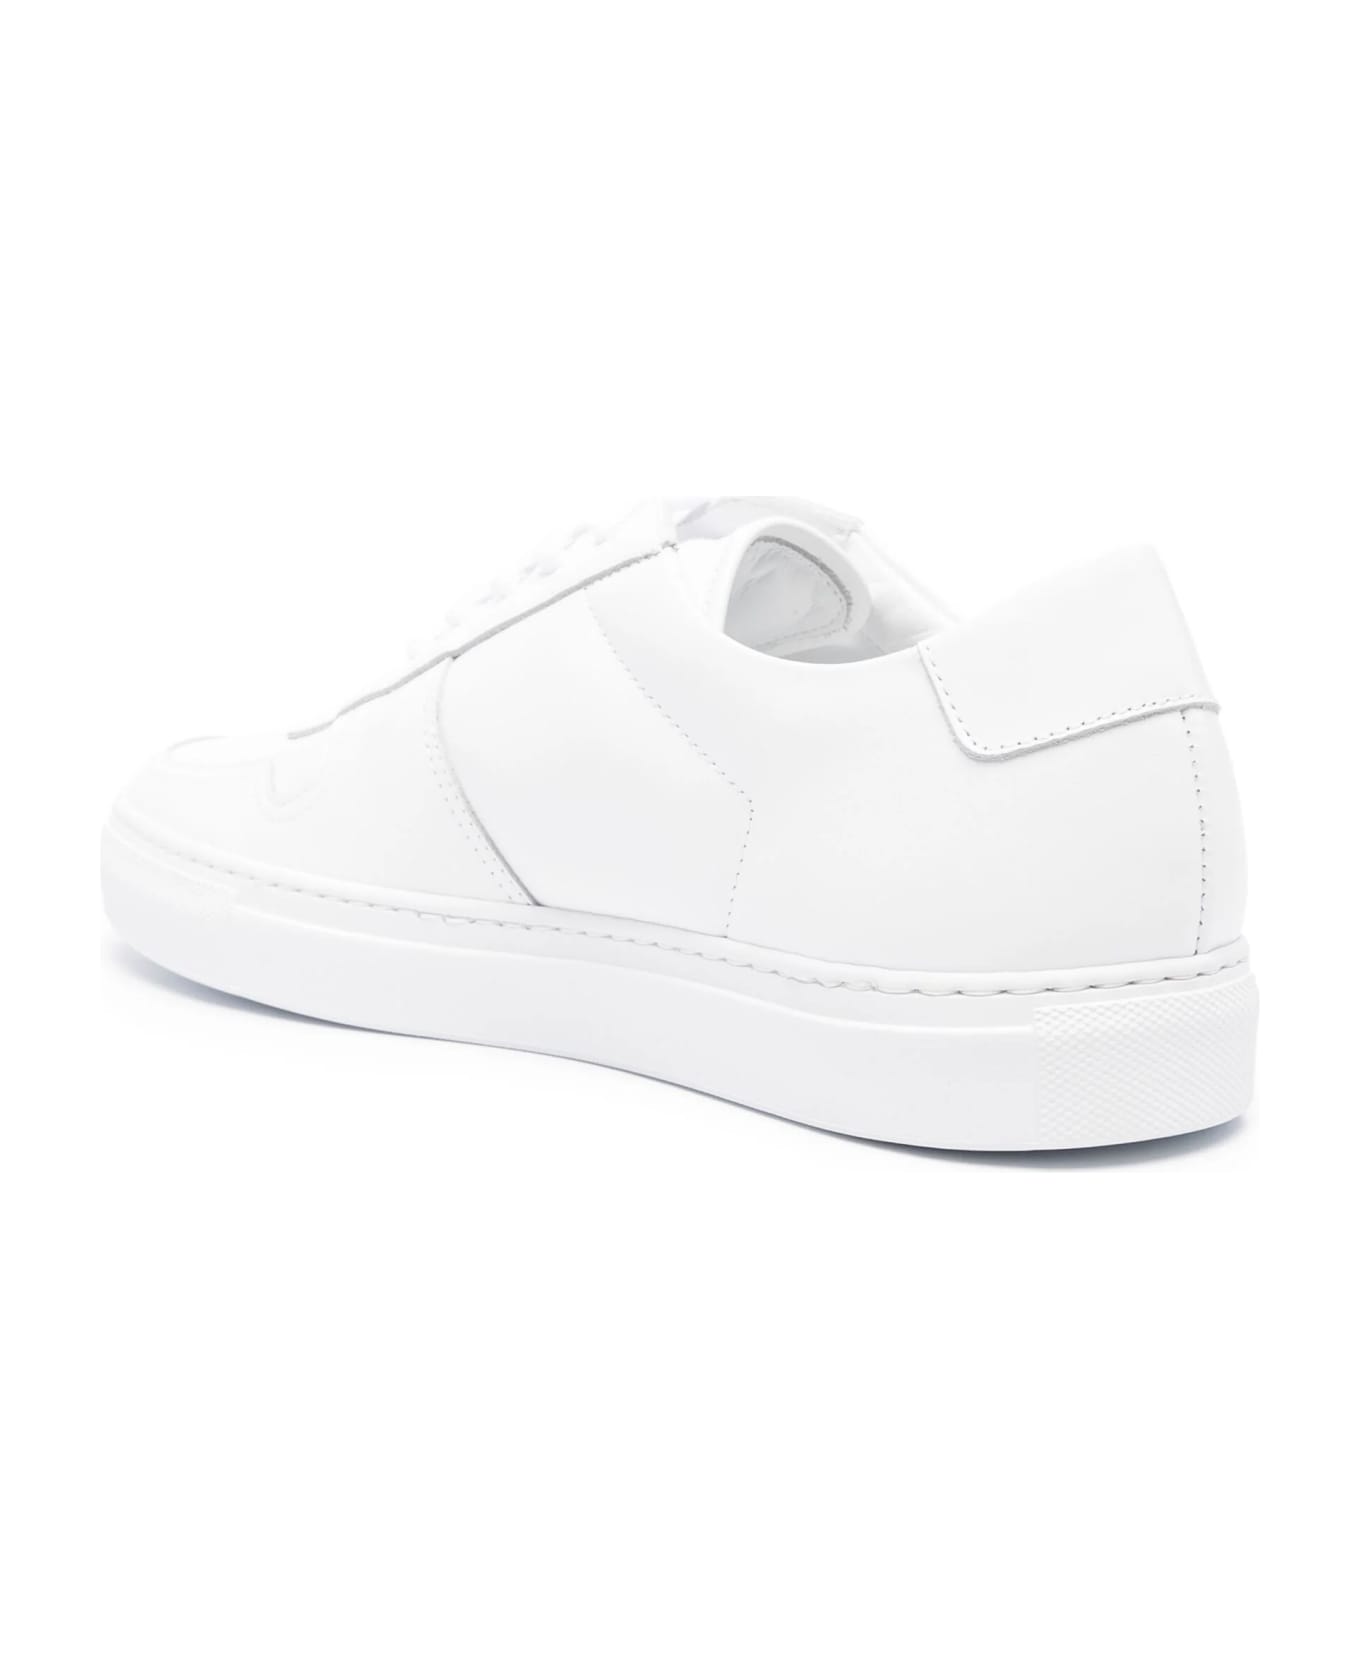 Common Projects Bball Low In Leather - White スニーカー